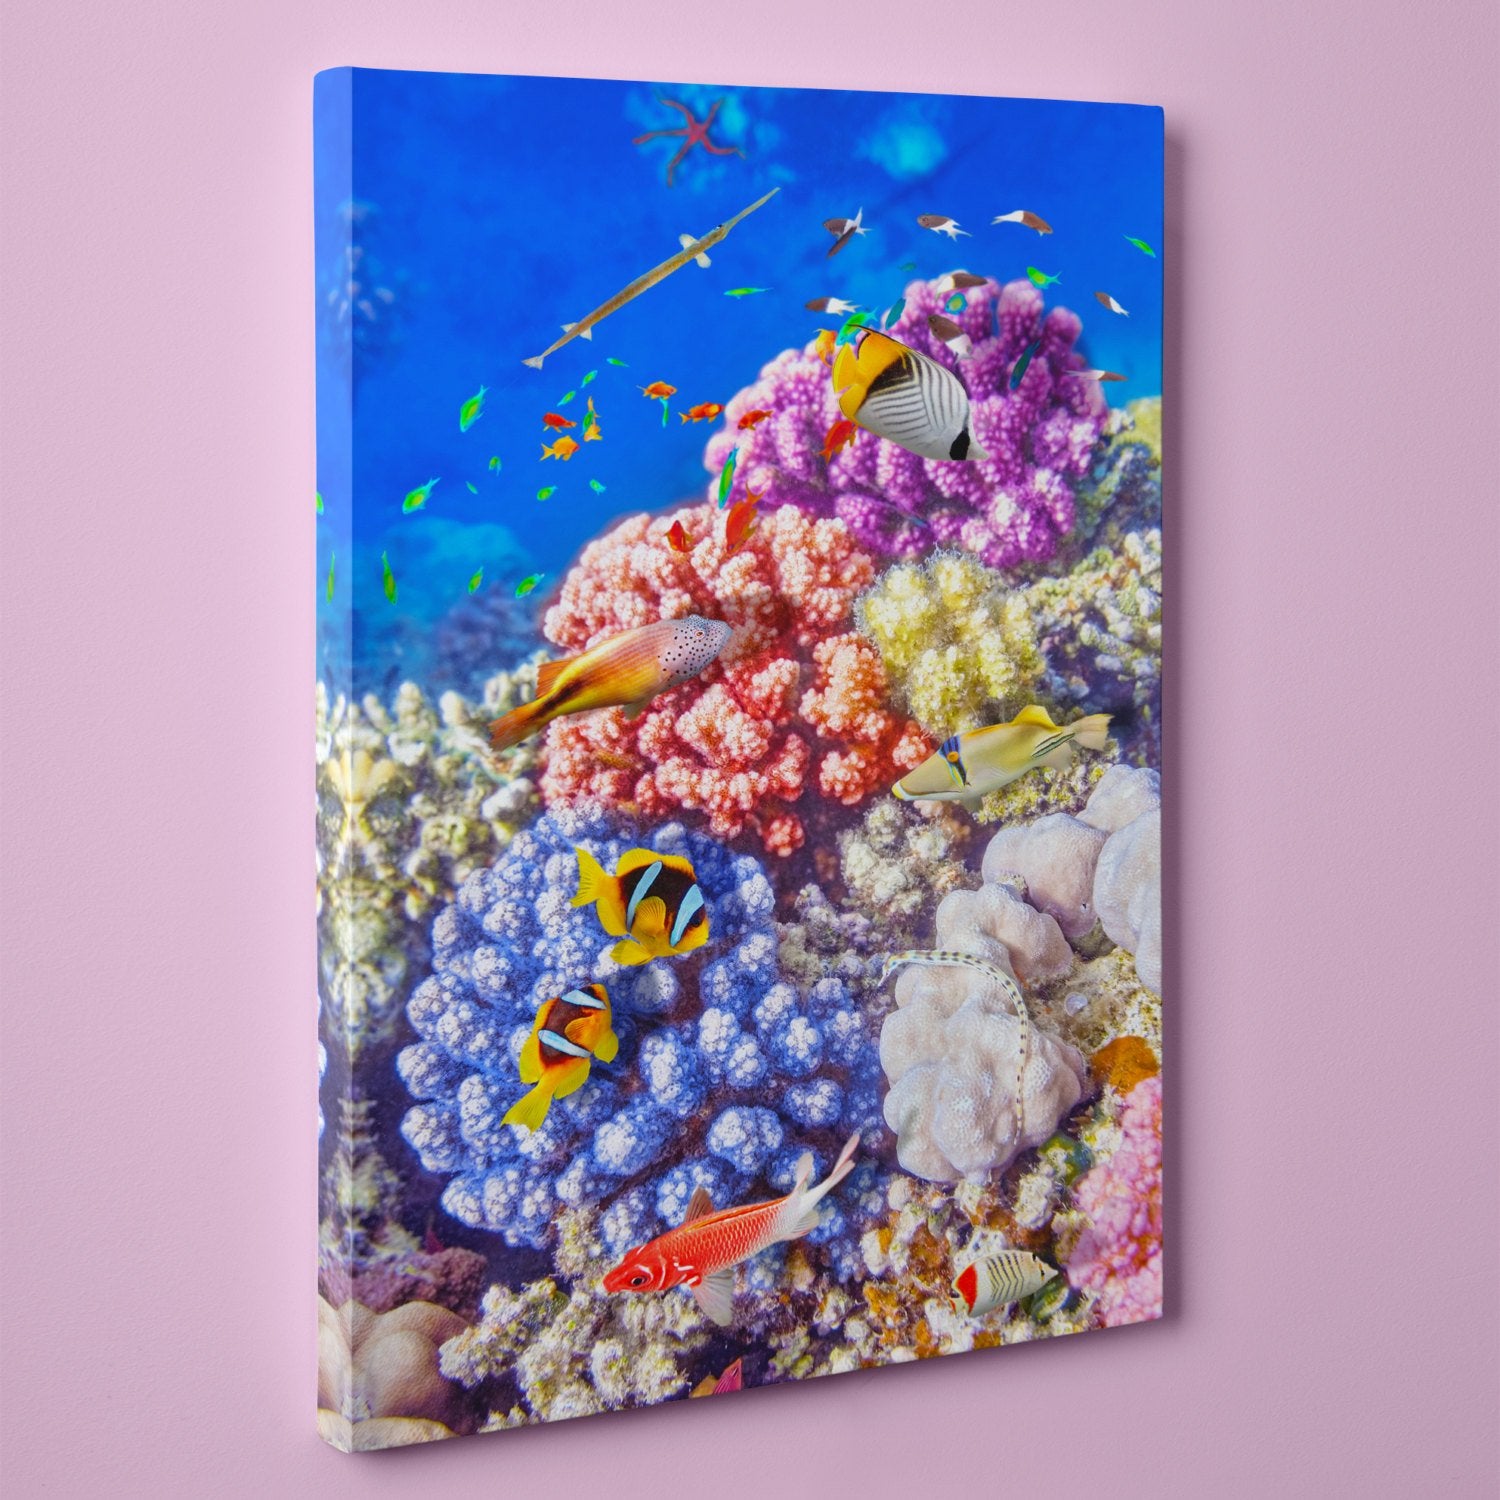 Caribbean Coral and Tropical Fish, Underwater Photo (24" x 36") - Canvas Wrap Print